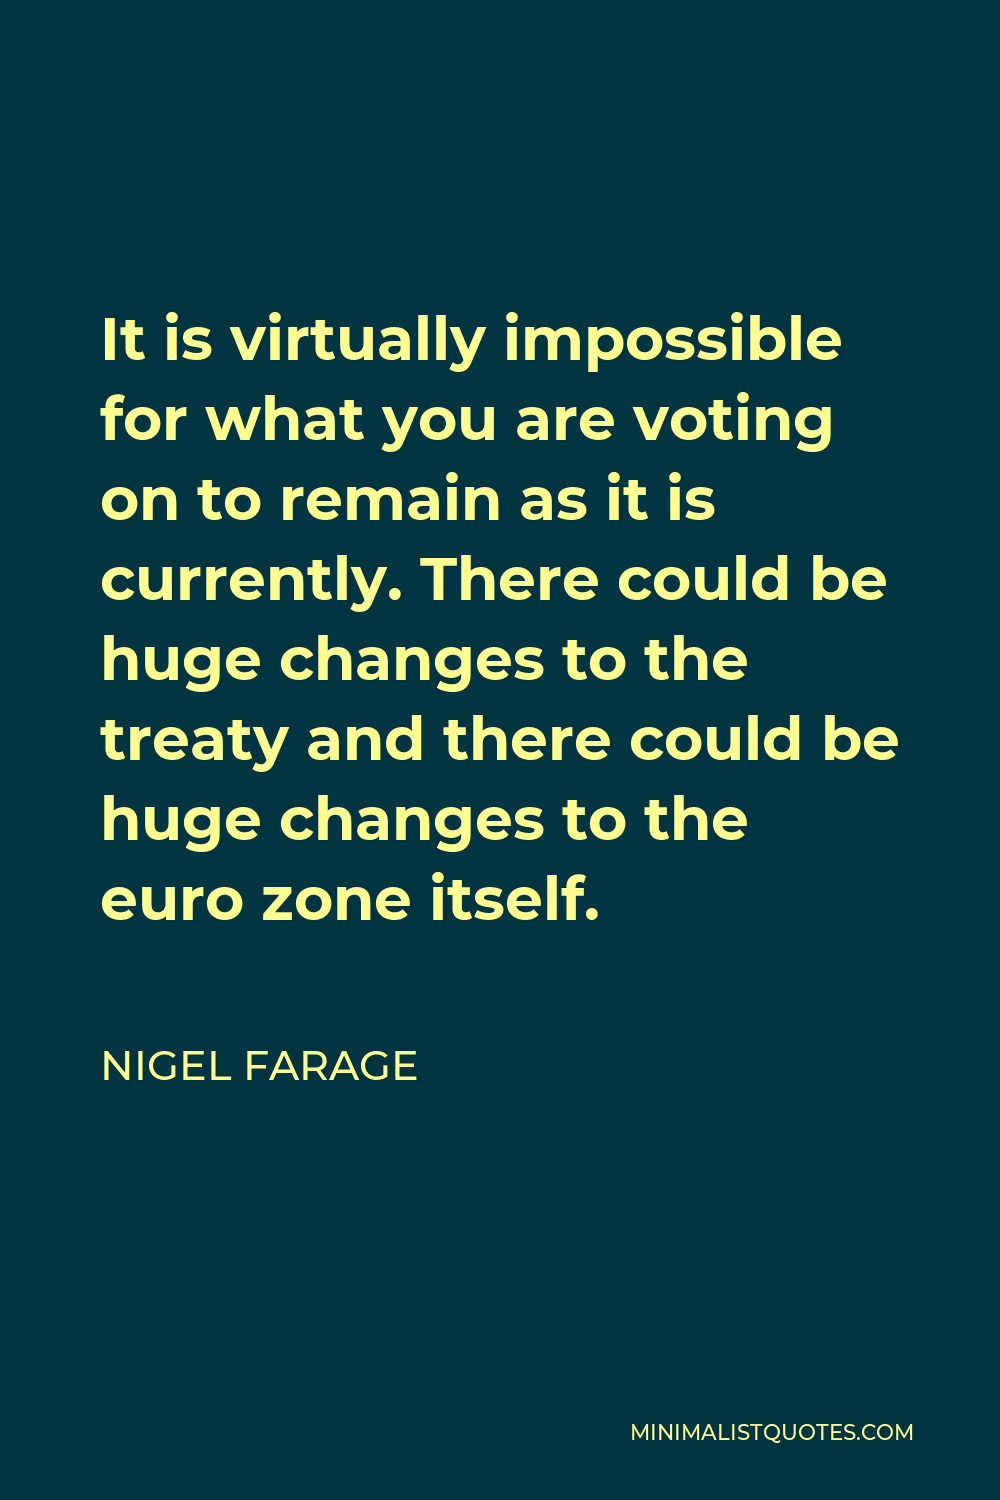 Nigel Farage Quote - It is virtually impossible for what you are voting on to remain as it is currently. There could be huge changes to the treaty and there could be huge changes to the euro zone itself.